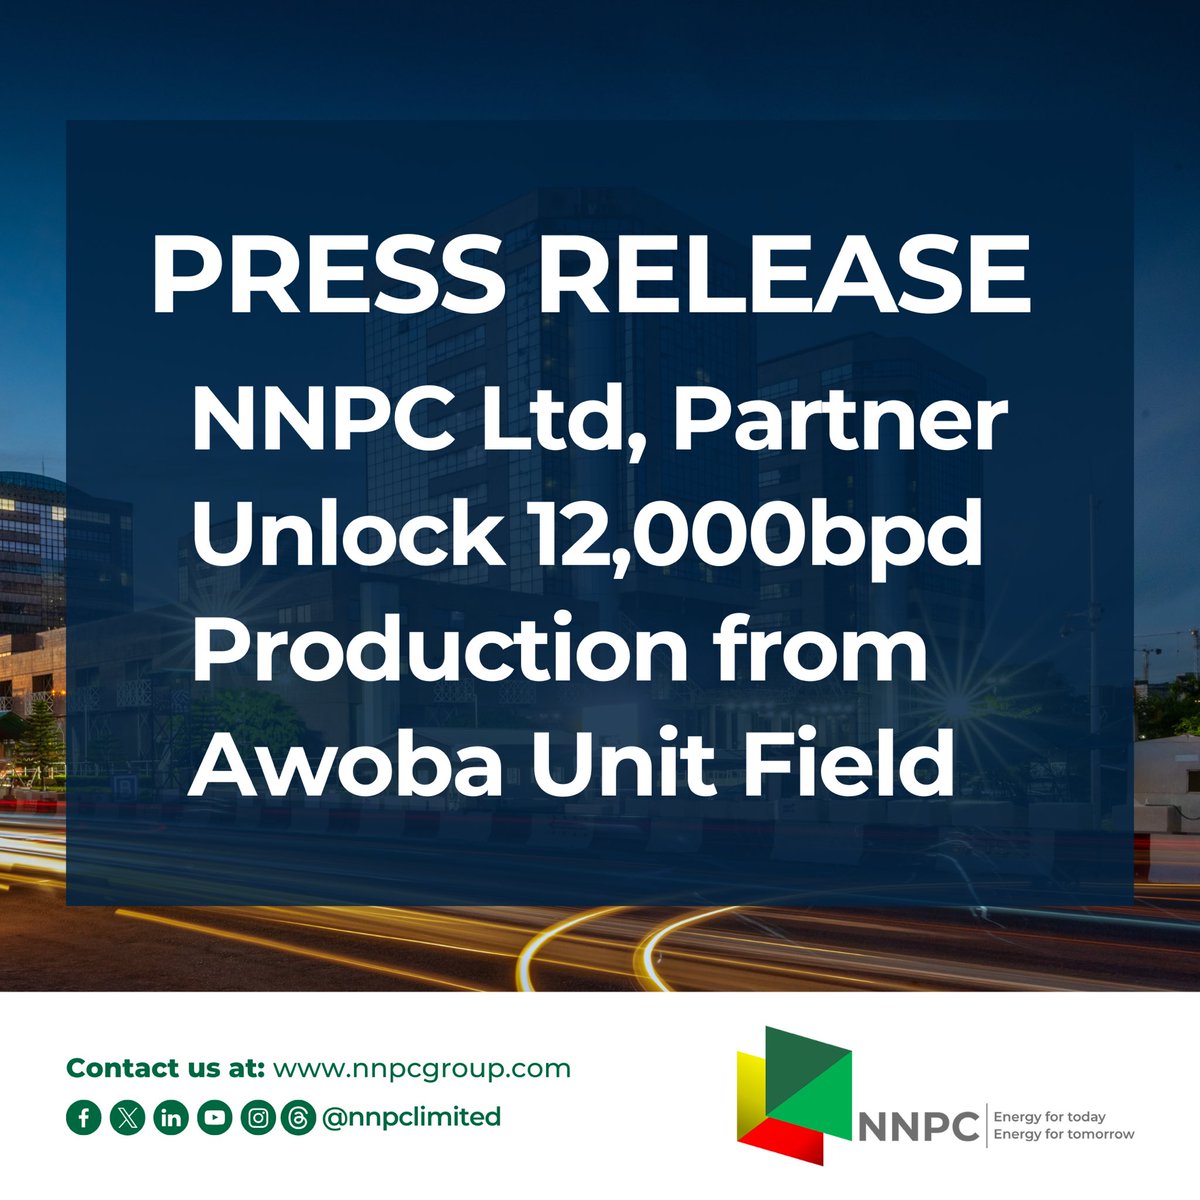 PRESS RELEASE

NNPC Ltd, Partner Unlock 12,000bpd Production from Awoba Unit Field  

Keen on optimising production from the nation’s hydrocarbon assets to boost revenues and meet the nation’s OPEC production quota, the Nigerian National Petroleum Company Limited (NNPC Ltd.) and